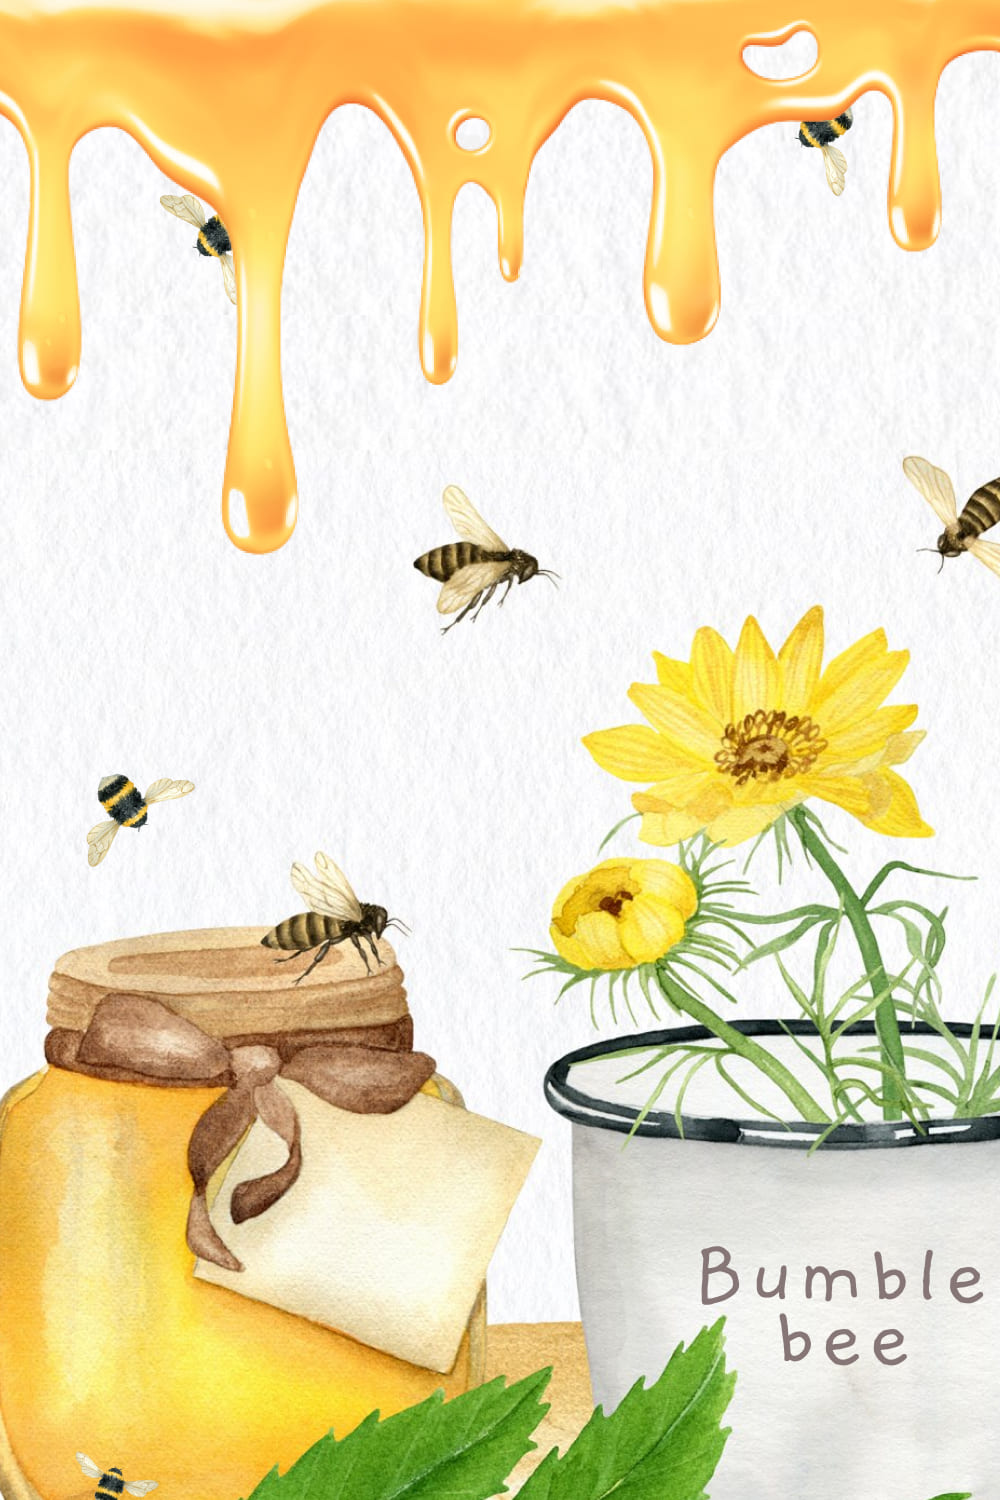 Bumble Bee Clipart Png Insect Honey - Pinterest Image Preview.